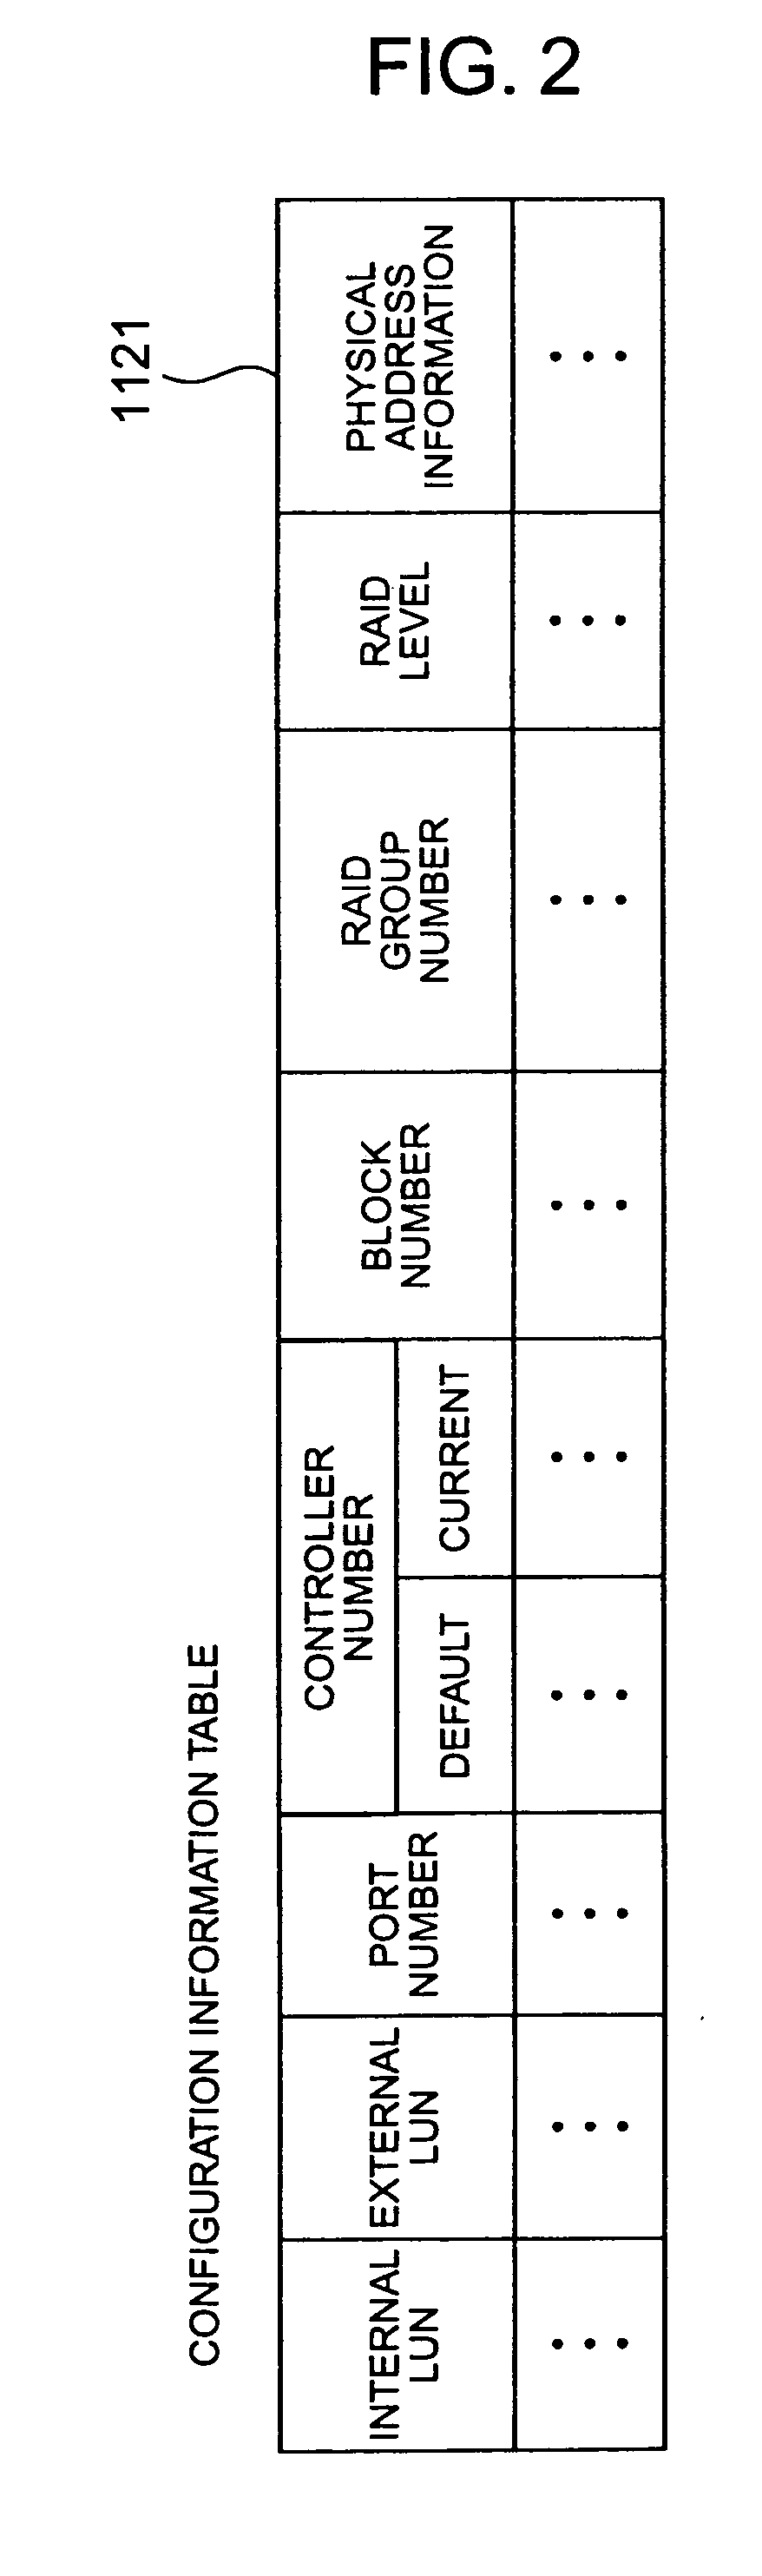 Duel controller system for dynamically allocating control of disk units